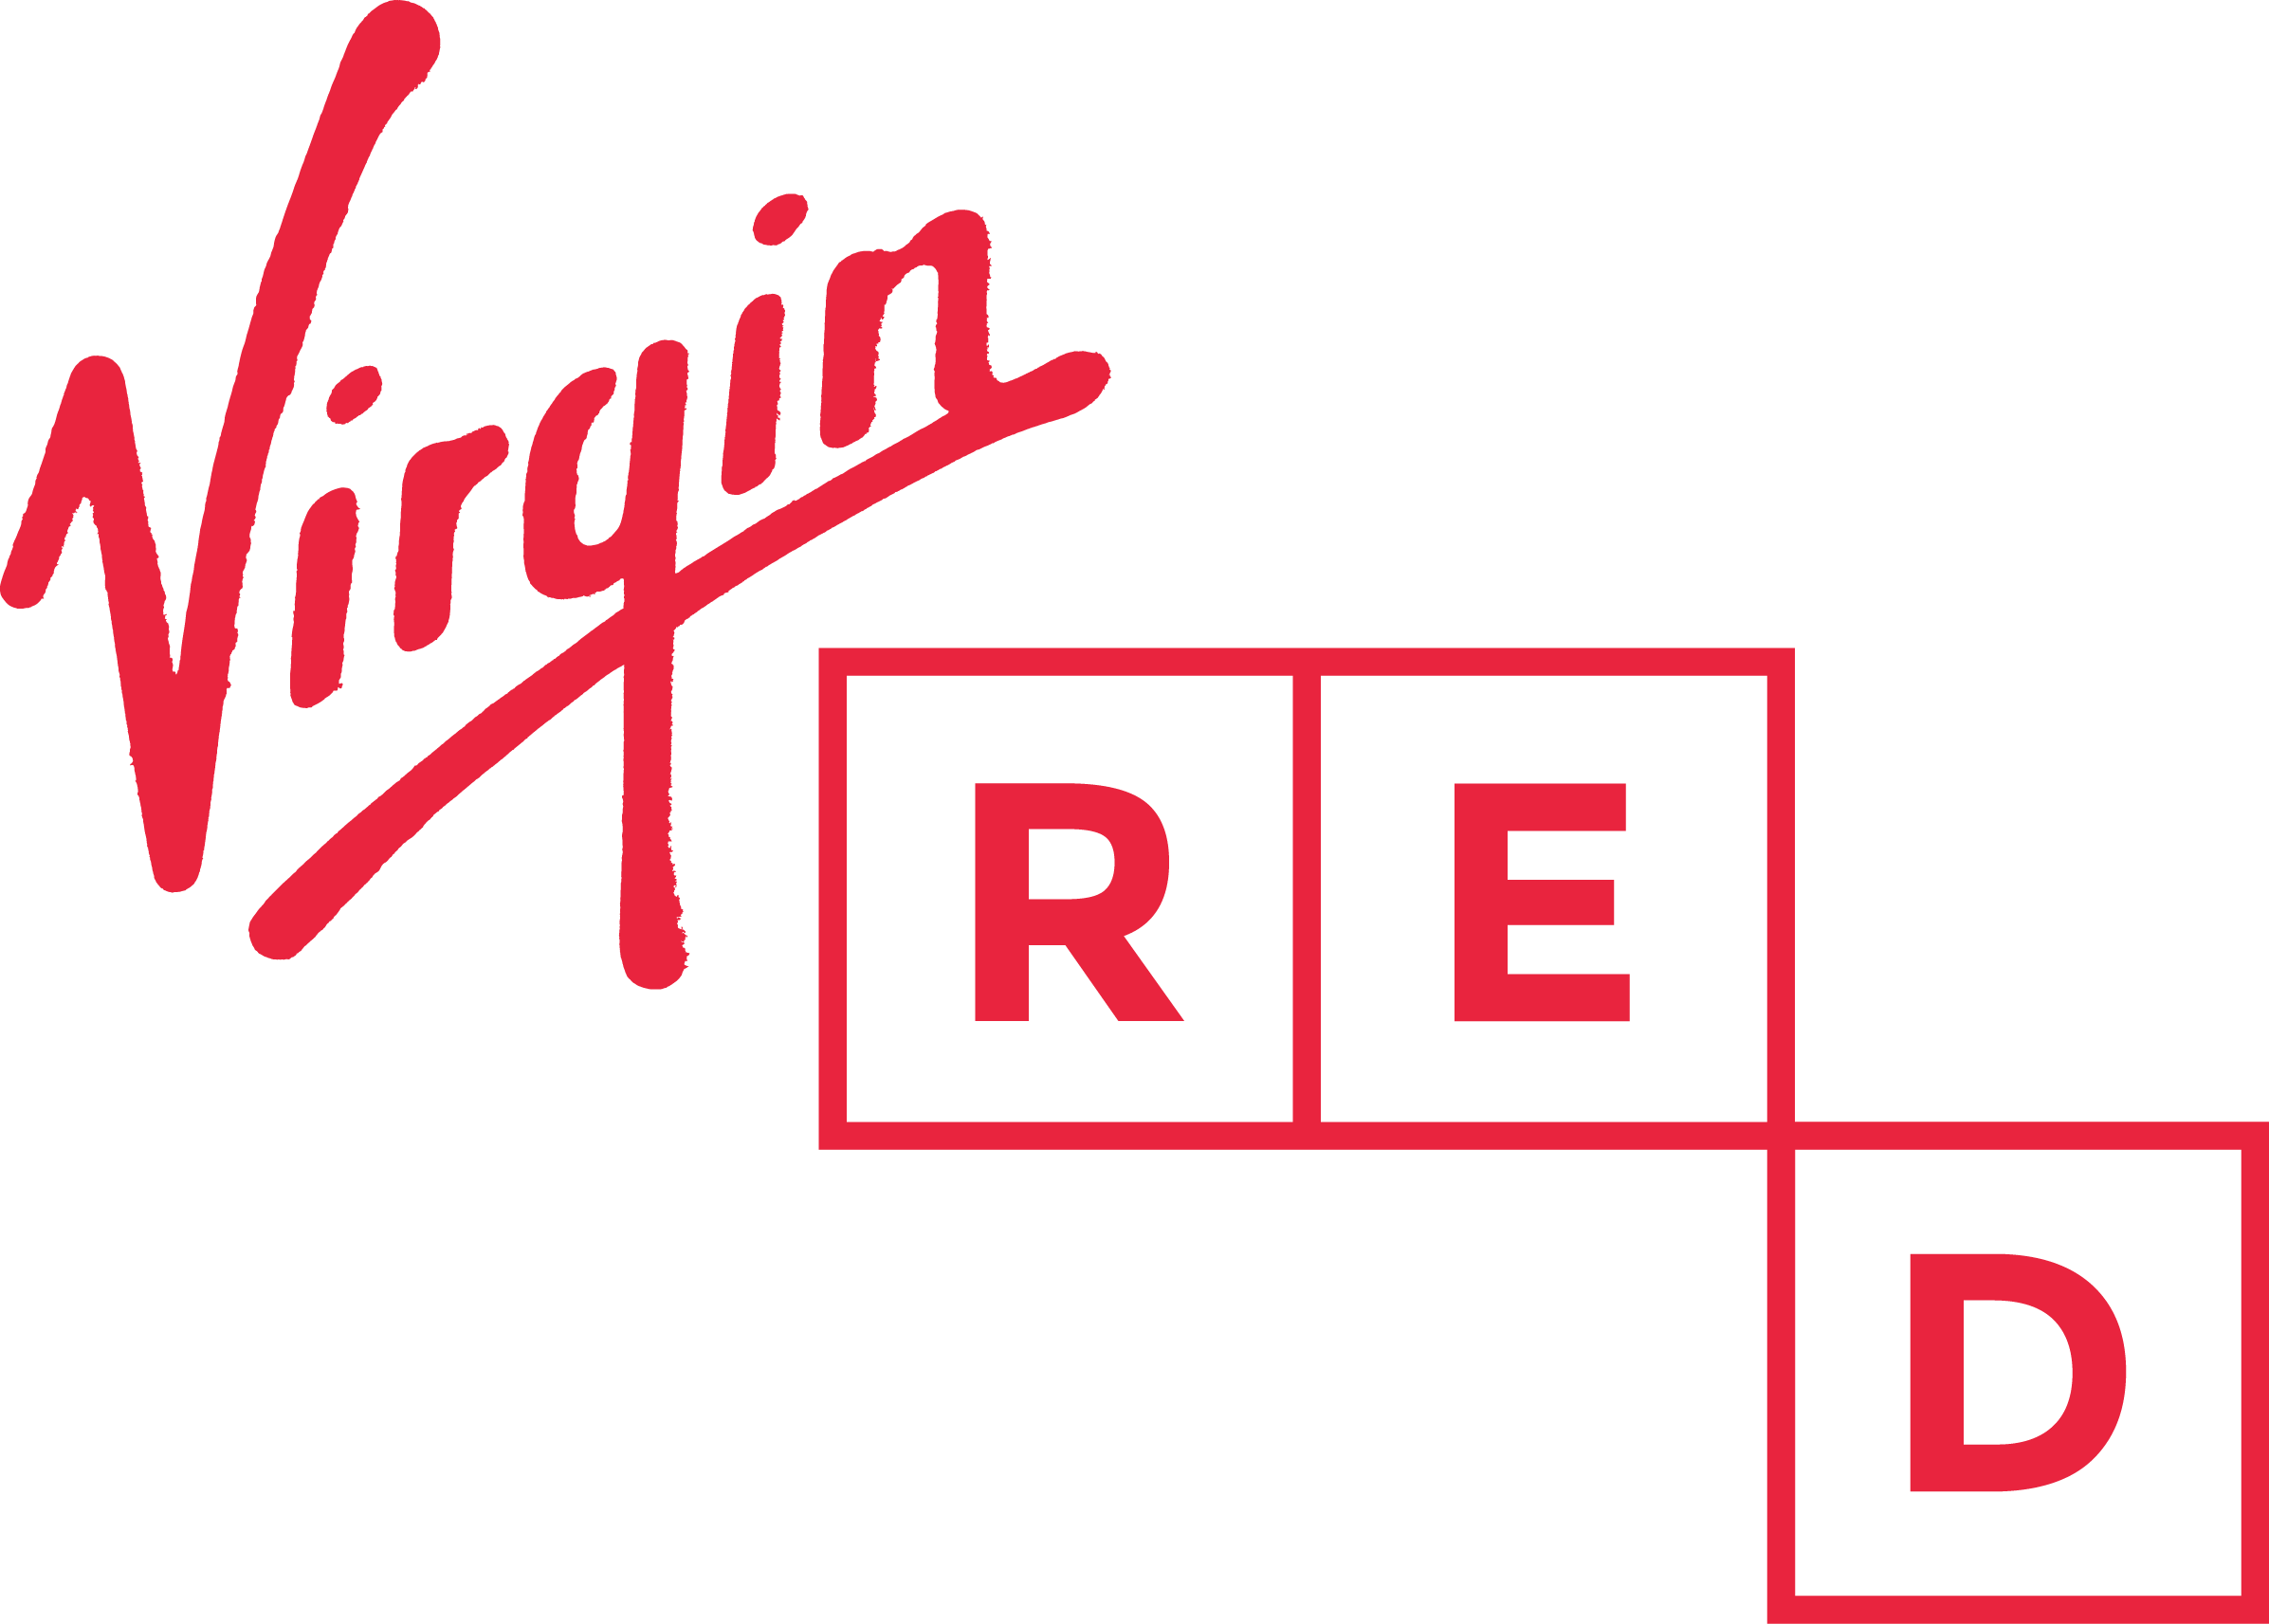 All Red Logo - Affinity promo codes | Virgin Holidays